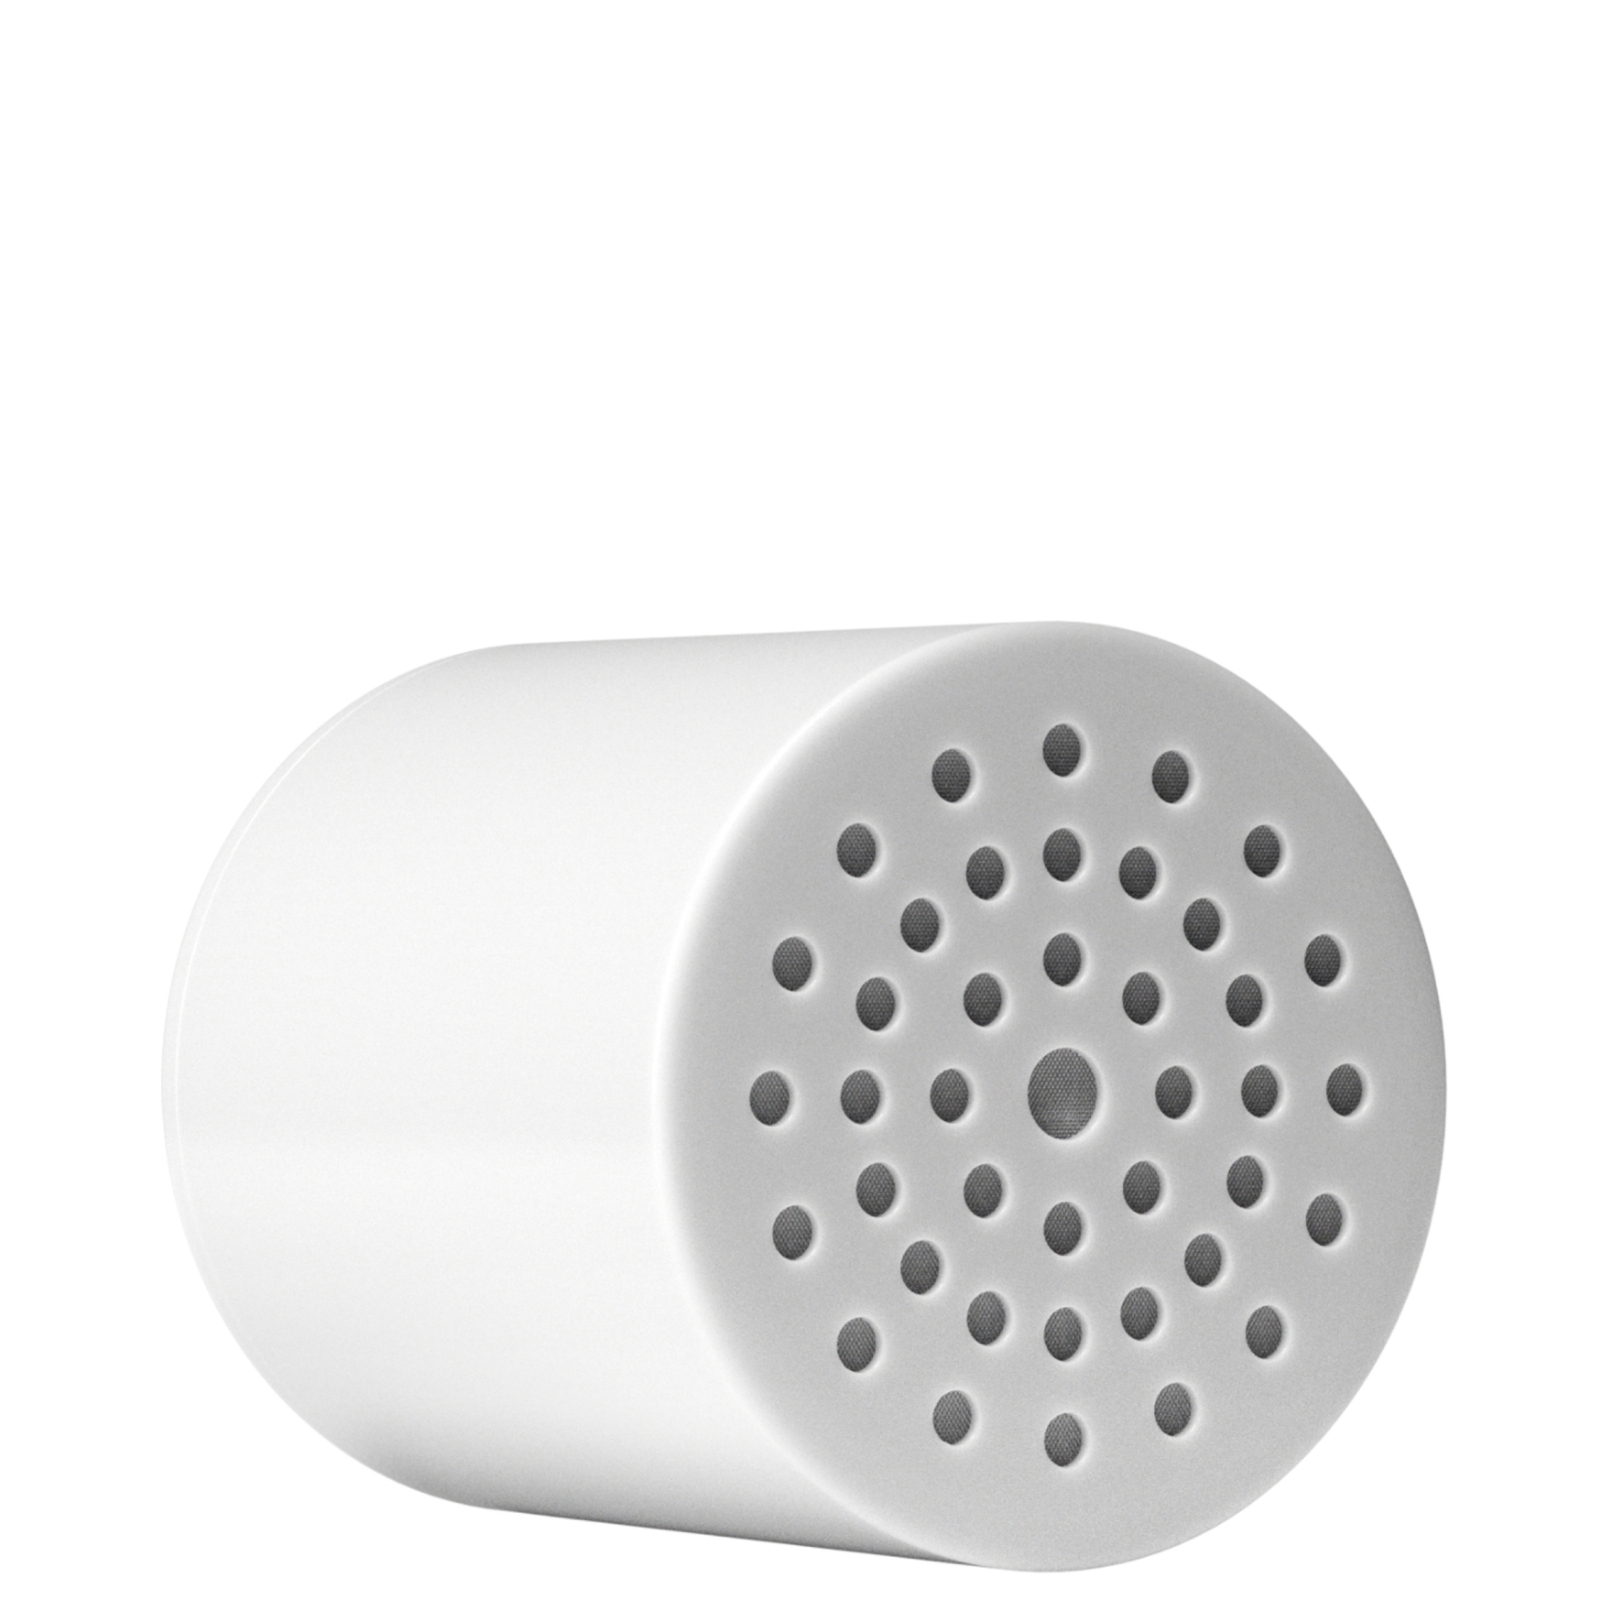 Act+acre Showerhead Replacement Filter In White